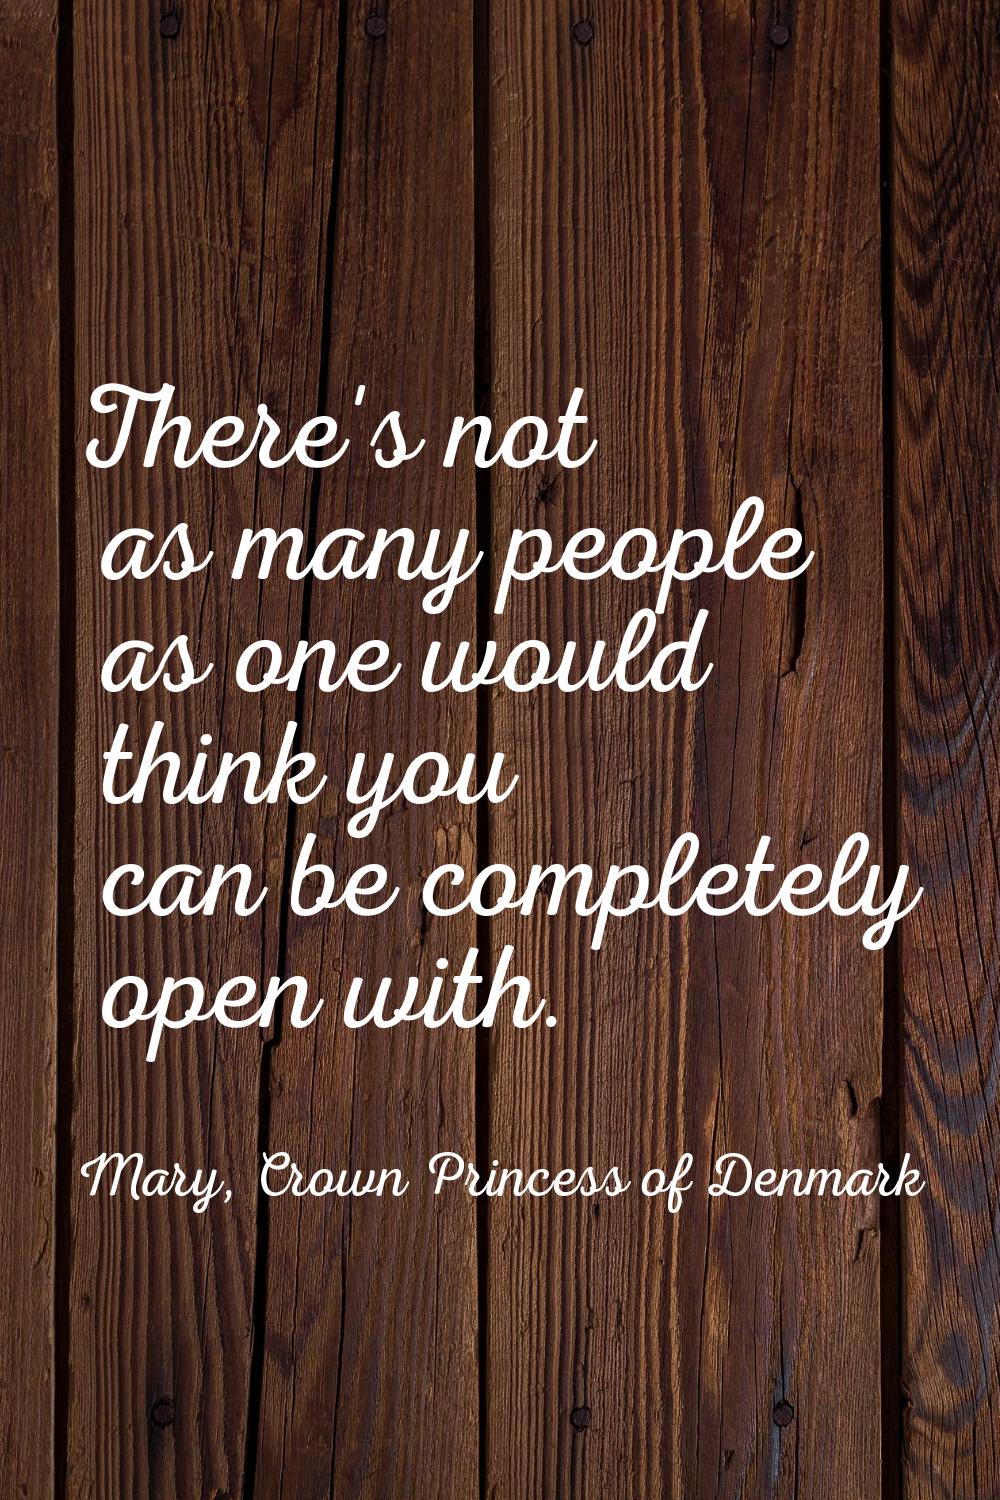 There's not as many people as one would think you can be completely open with.